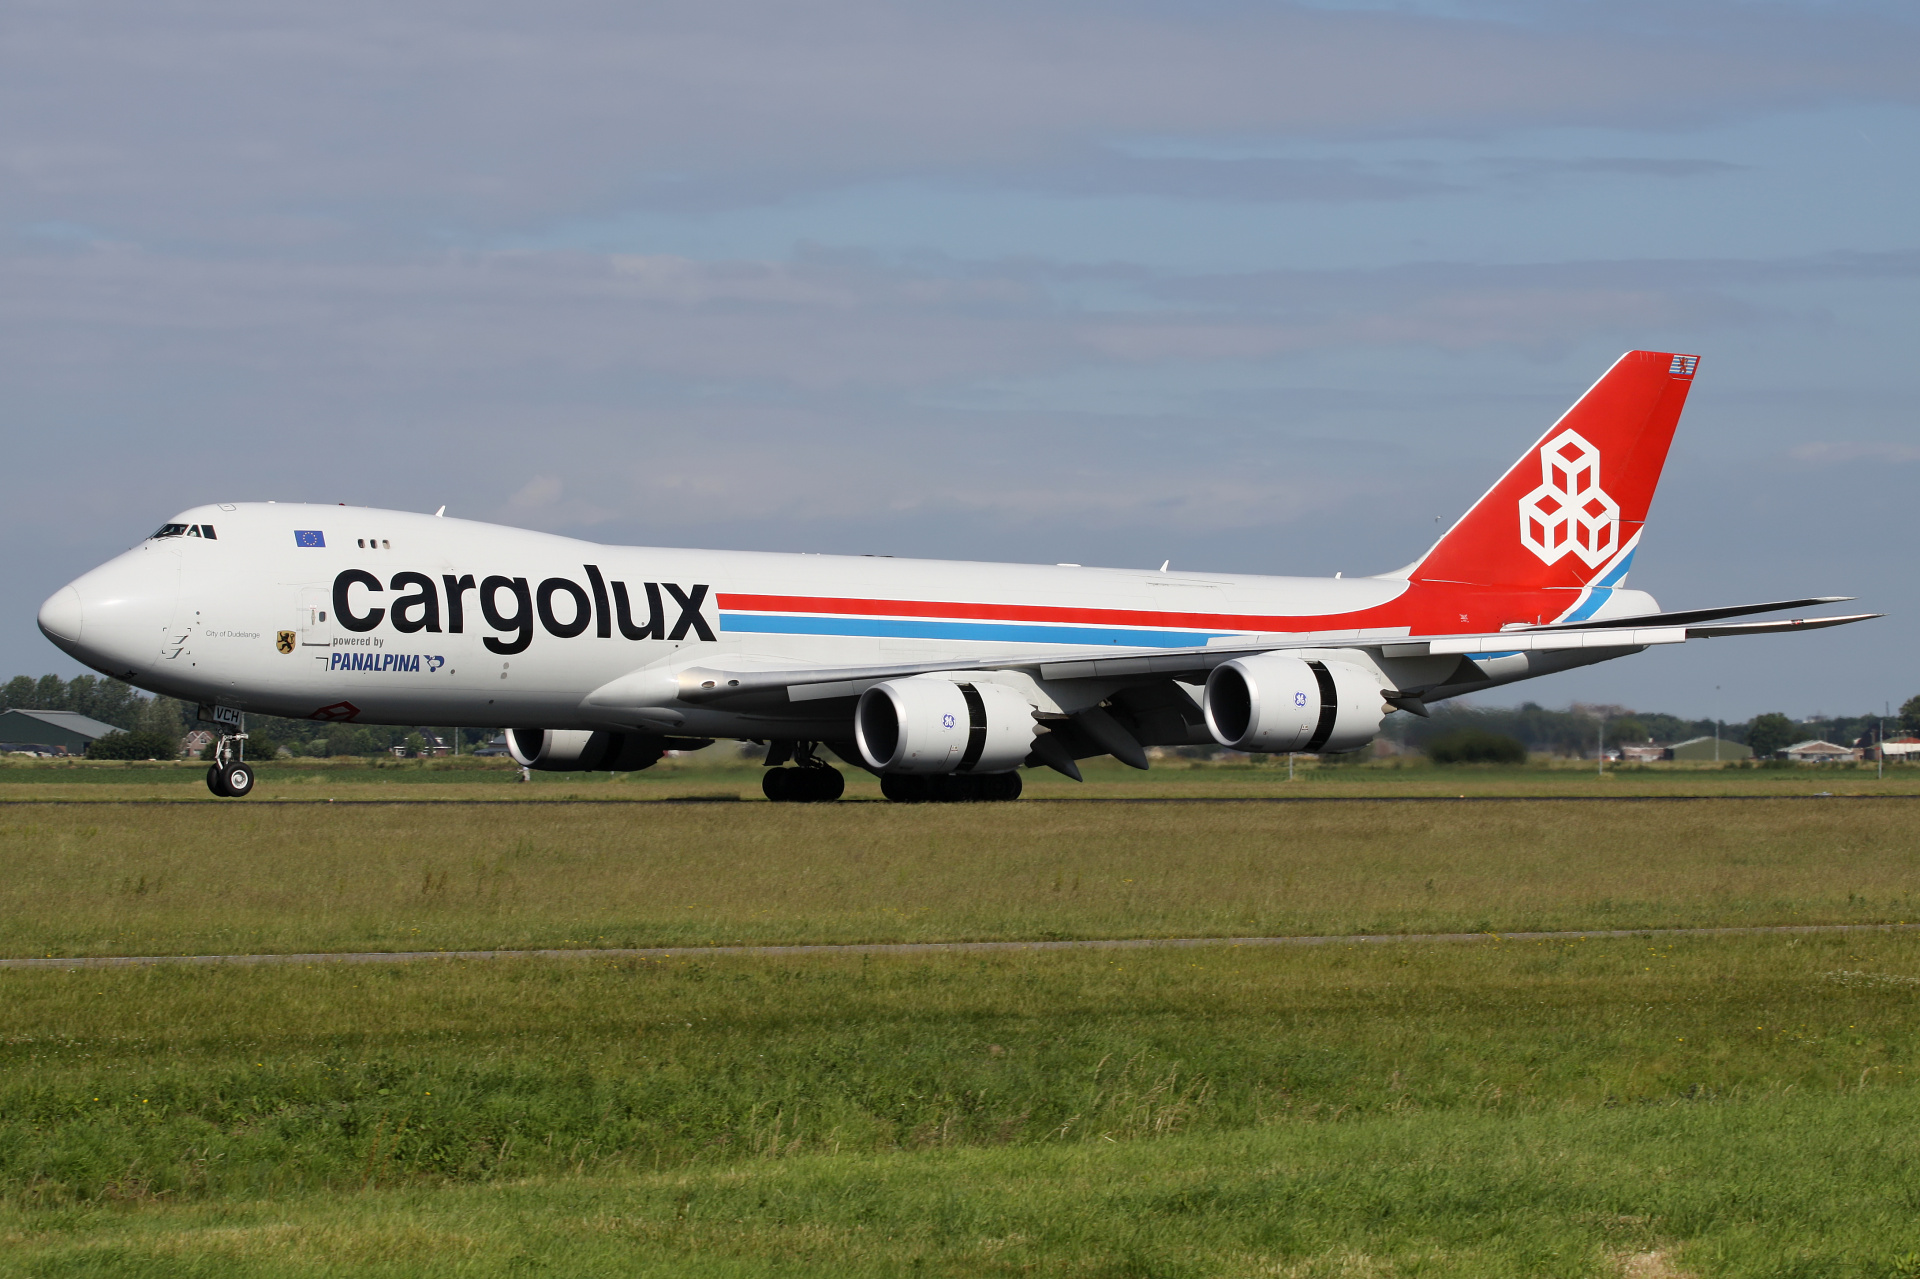 LX-VCH, Cargolux Airlines (Aircraft » Schiphol Spotting » Boeing 747-8F)